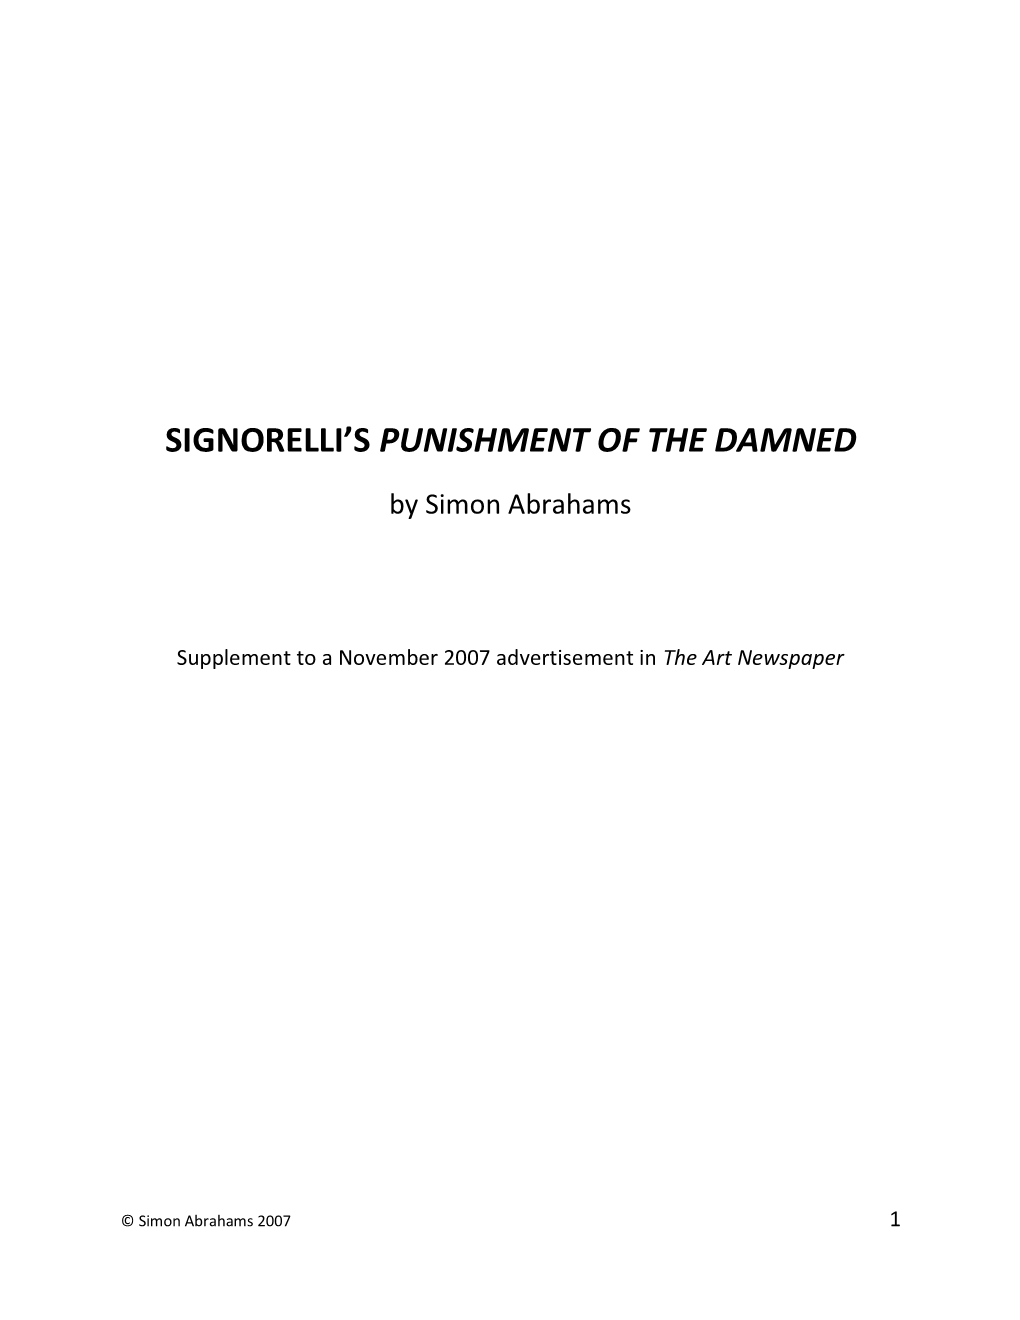 Signorelli's Punishment of the Damned